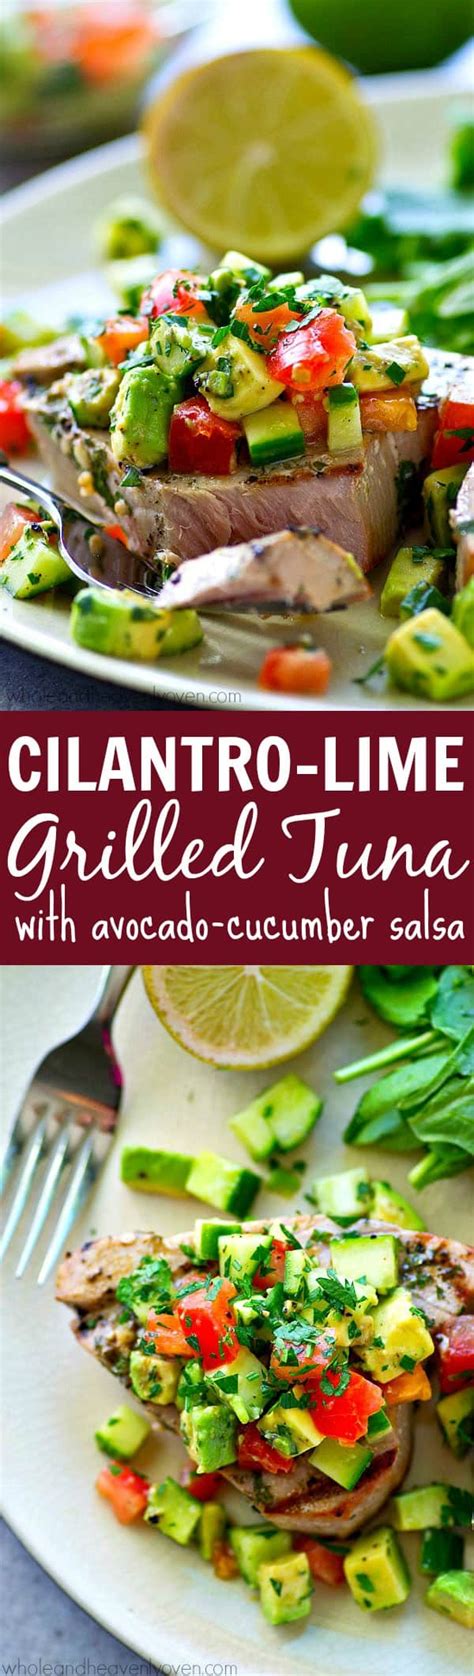 The avocado salsa is creamy, zesty from the lime juice and red wine vinegar, slightly spicy from the to make the avocado salsa: Cilantro Lime Grilled Tuna Avocado Cucumber Salsa